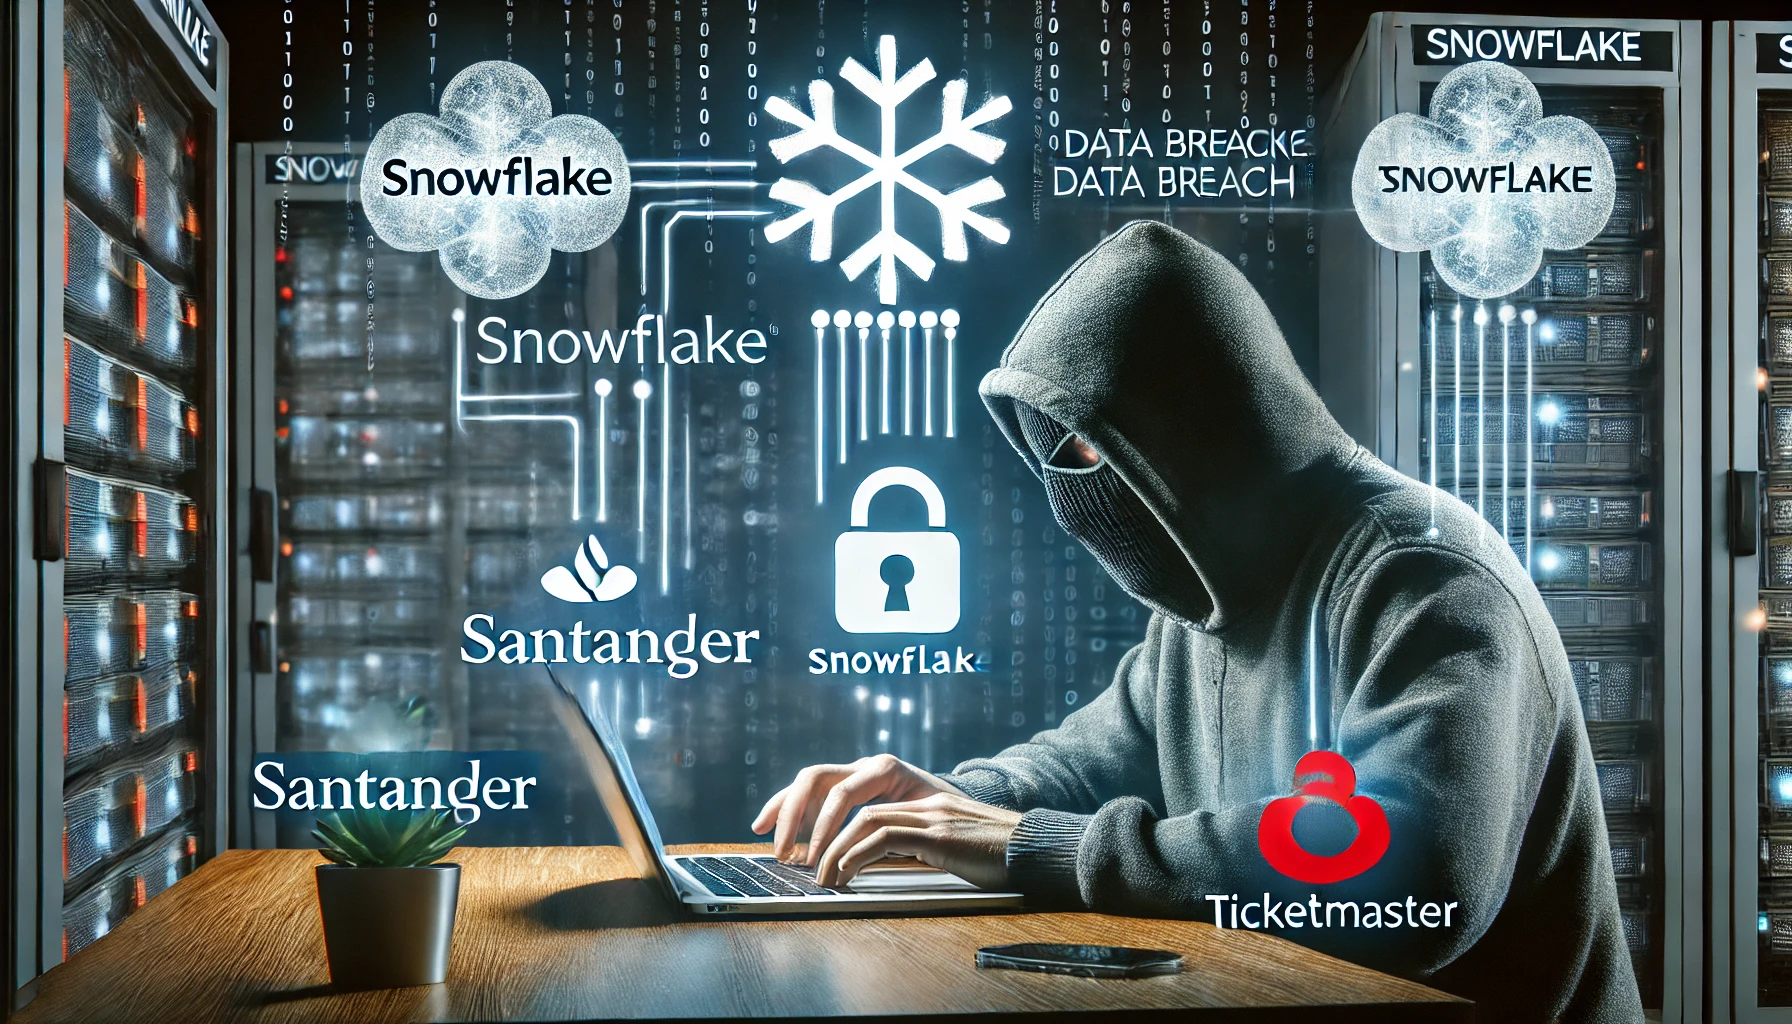 Snowflake Data Breach: What Really Happened